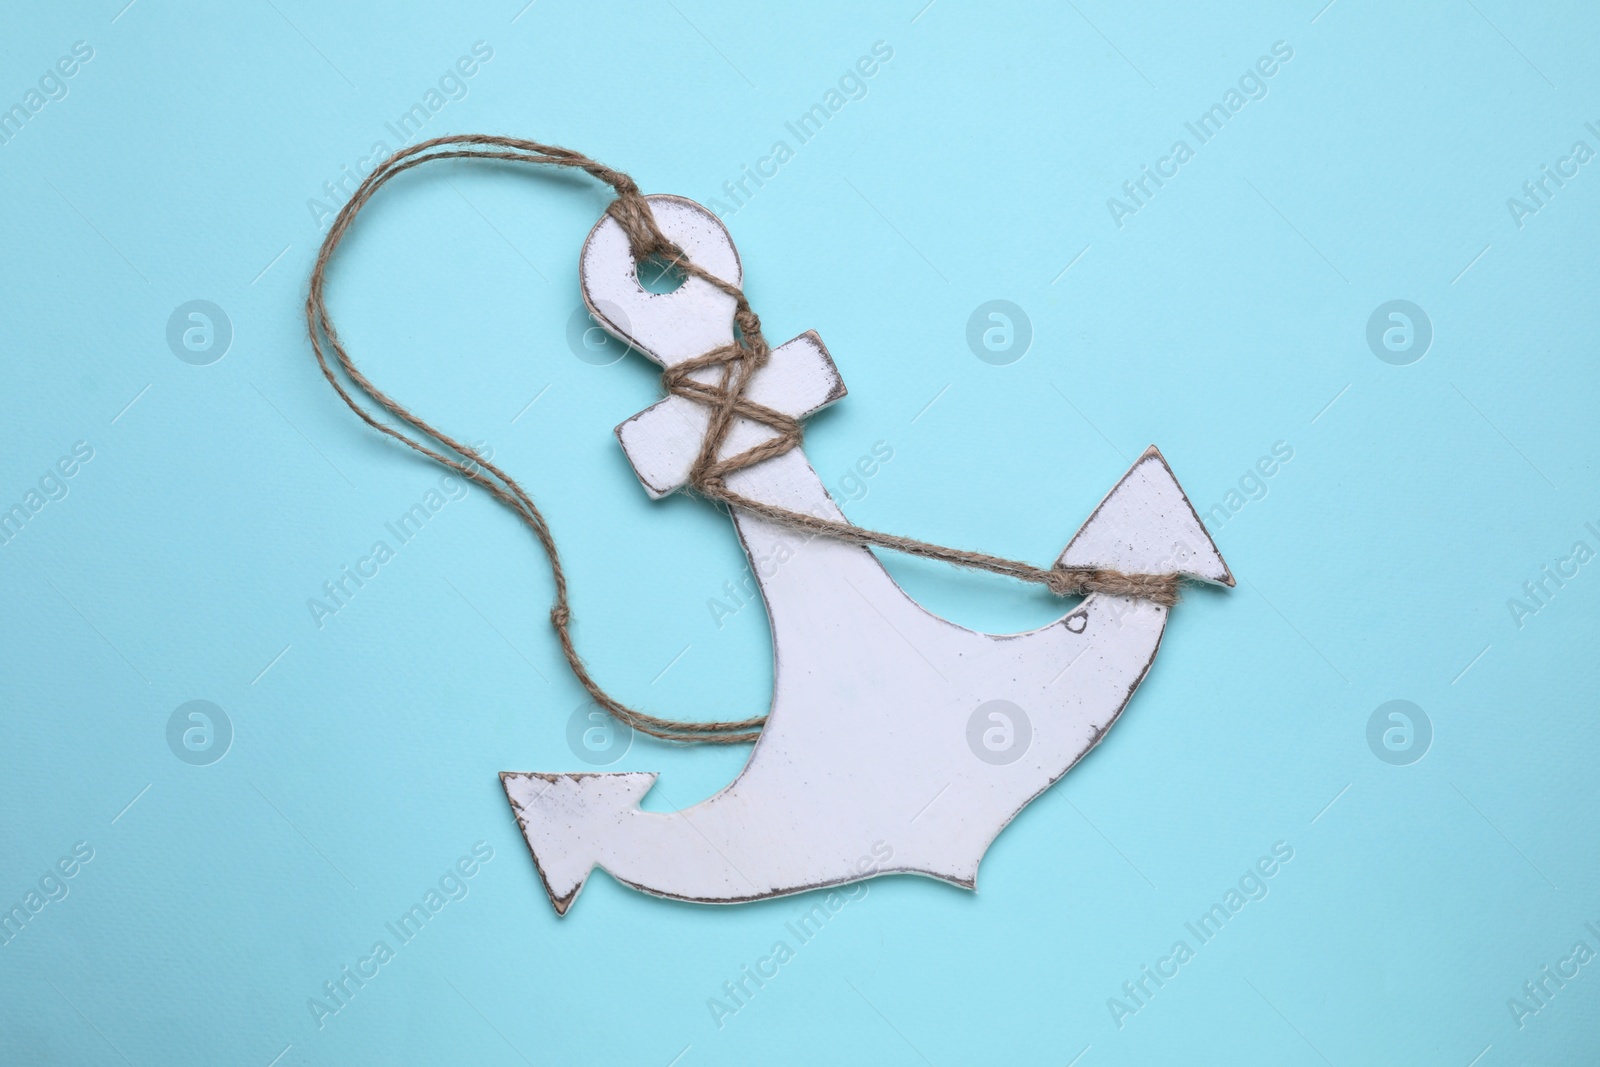 Photo of White wooden anchor figure on light blue background, top view